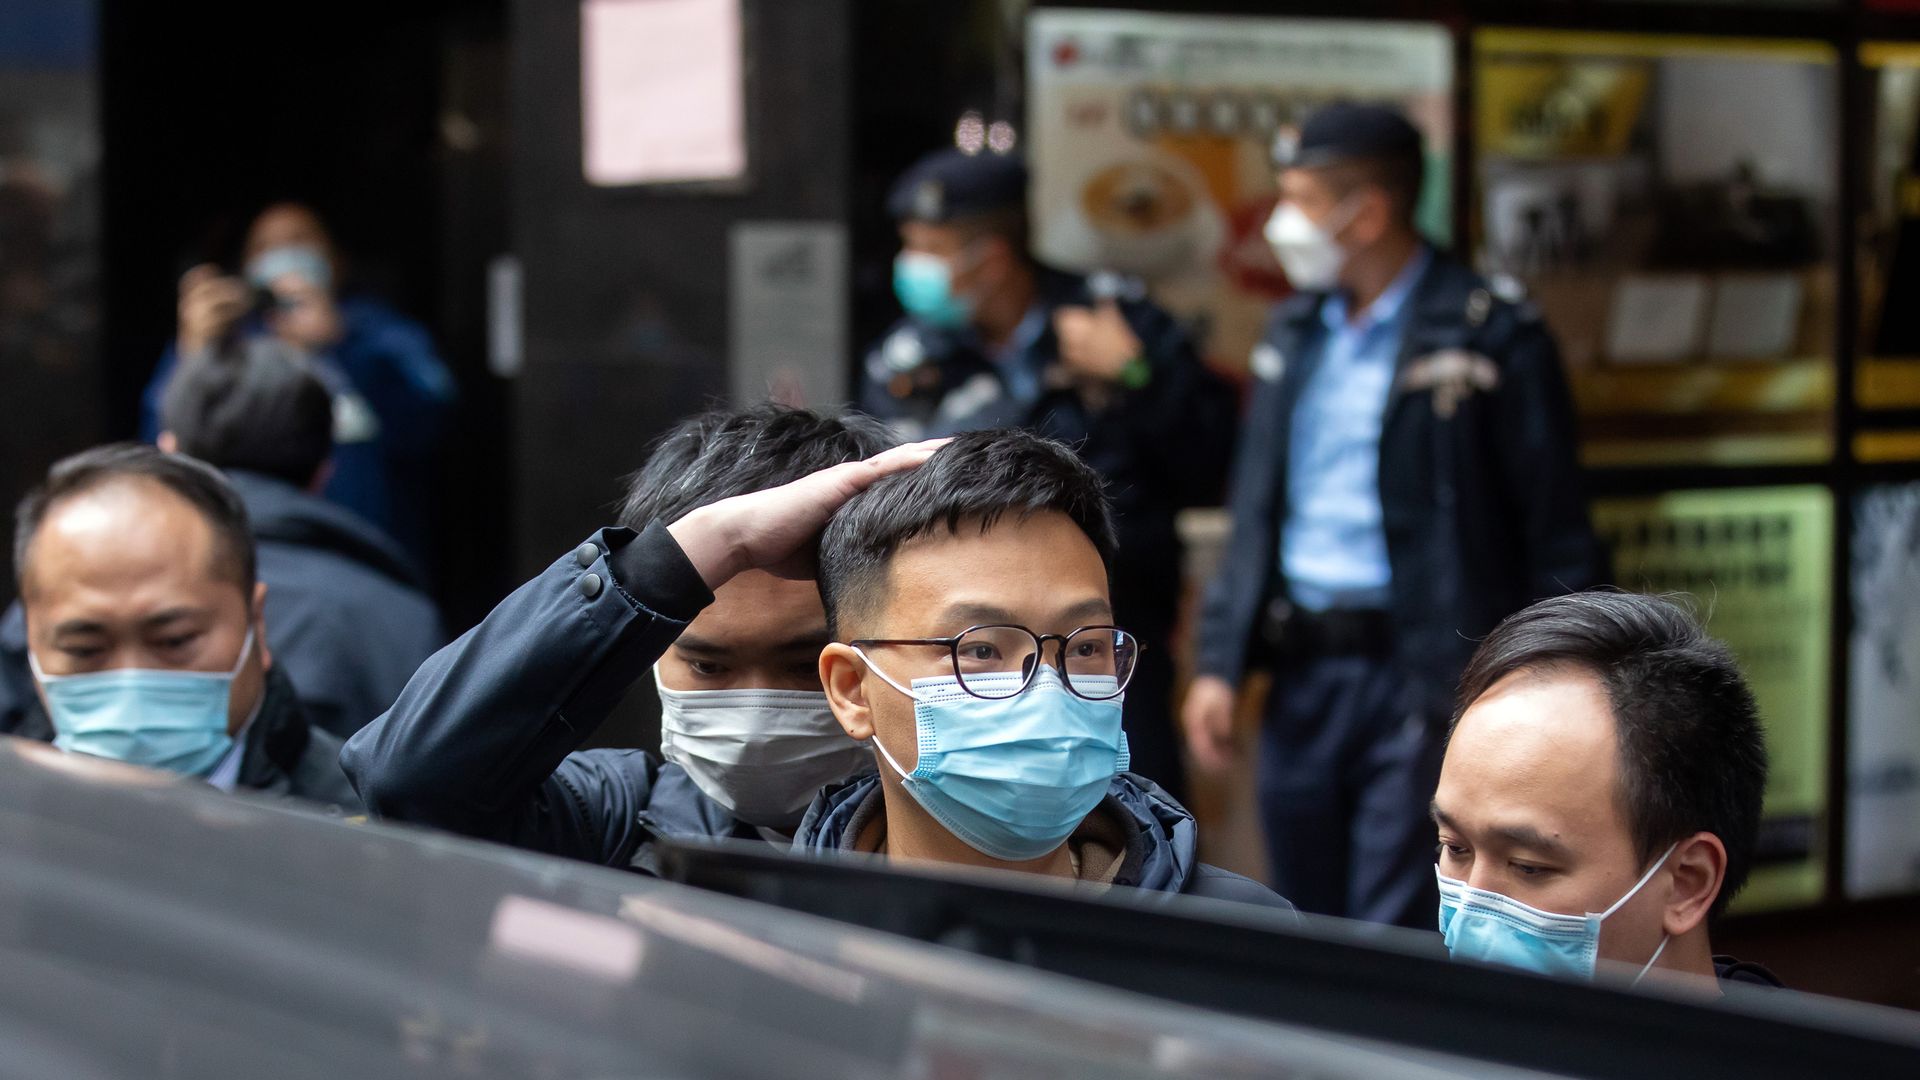  Stand News' Patrick Lam is escorted by officers with the Hong Kong Policeduring a raid of the media outlet's offices in Hong Kong, China, on Wednesday, Dec. 29. 